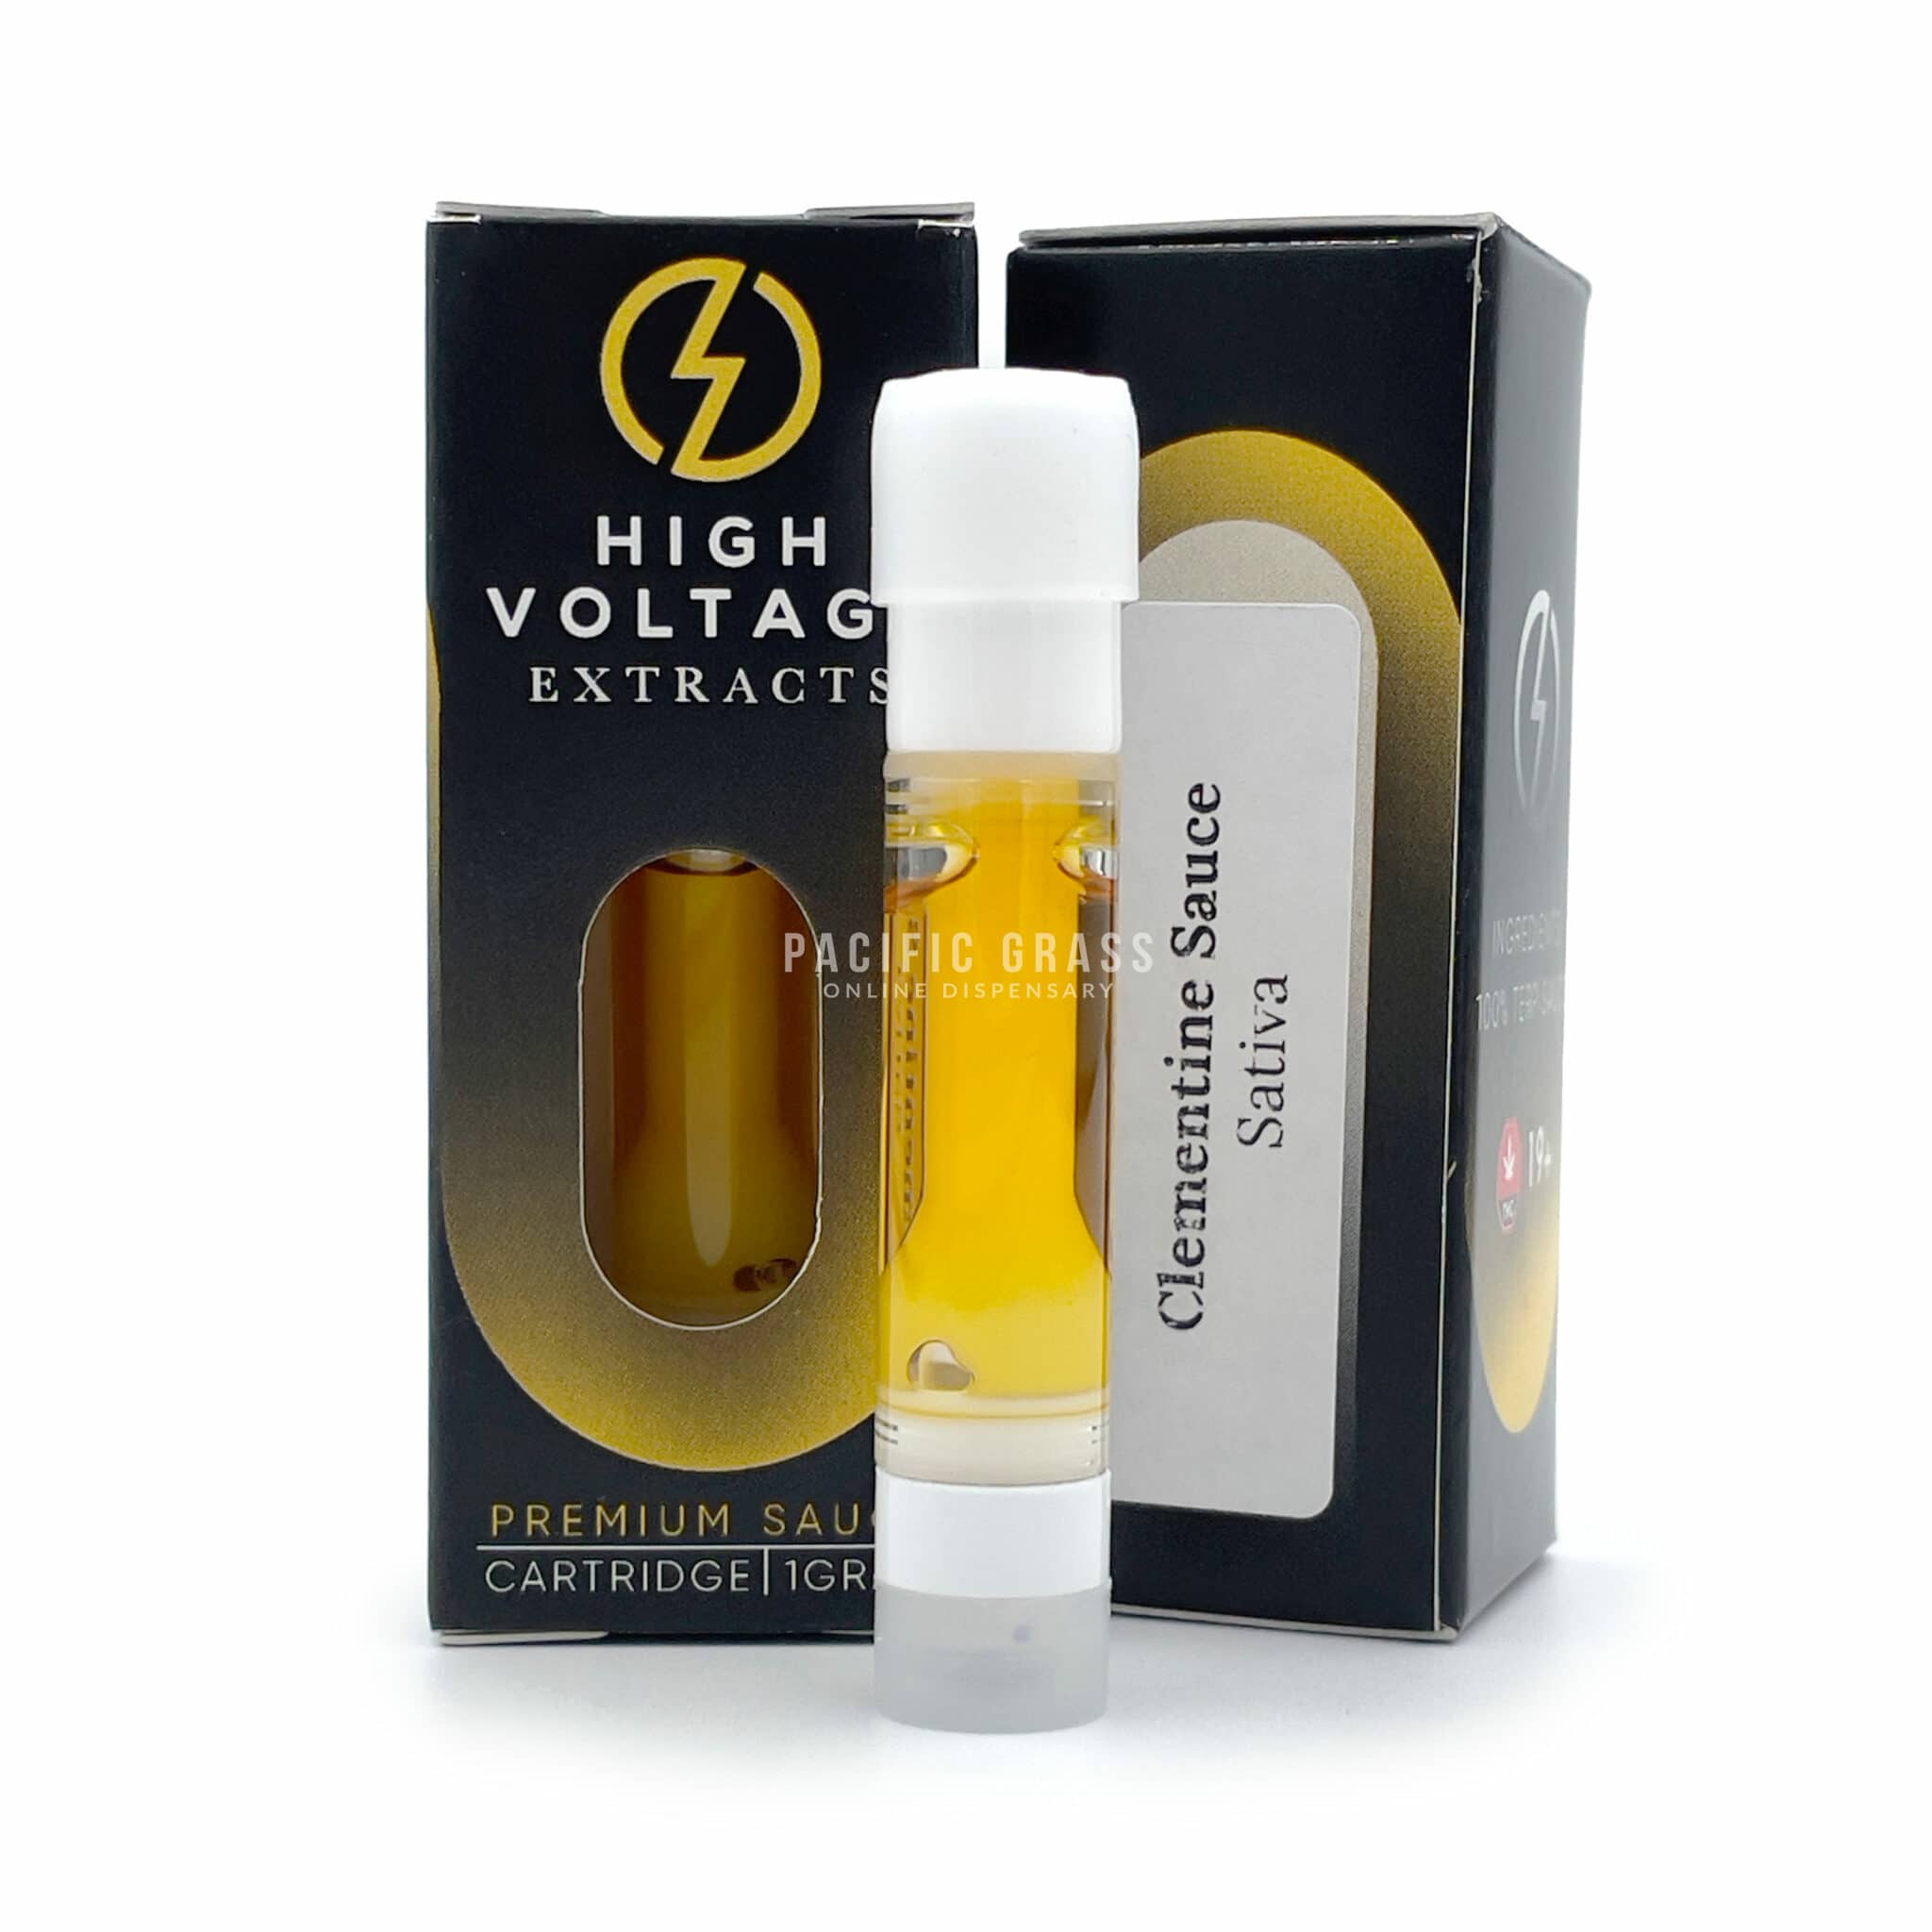 High voltage extracts sauce carts Clementine